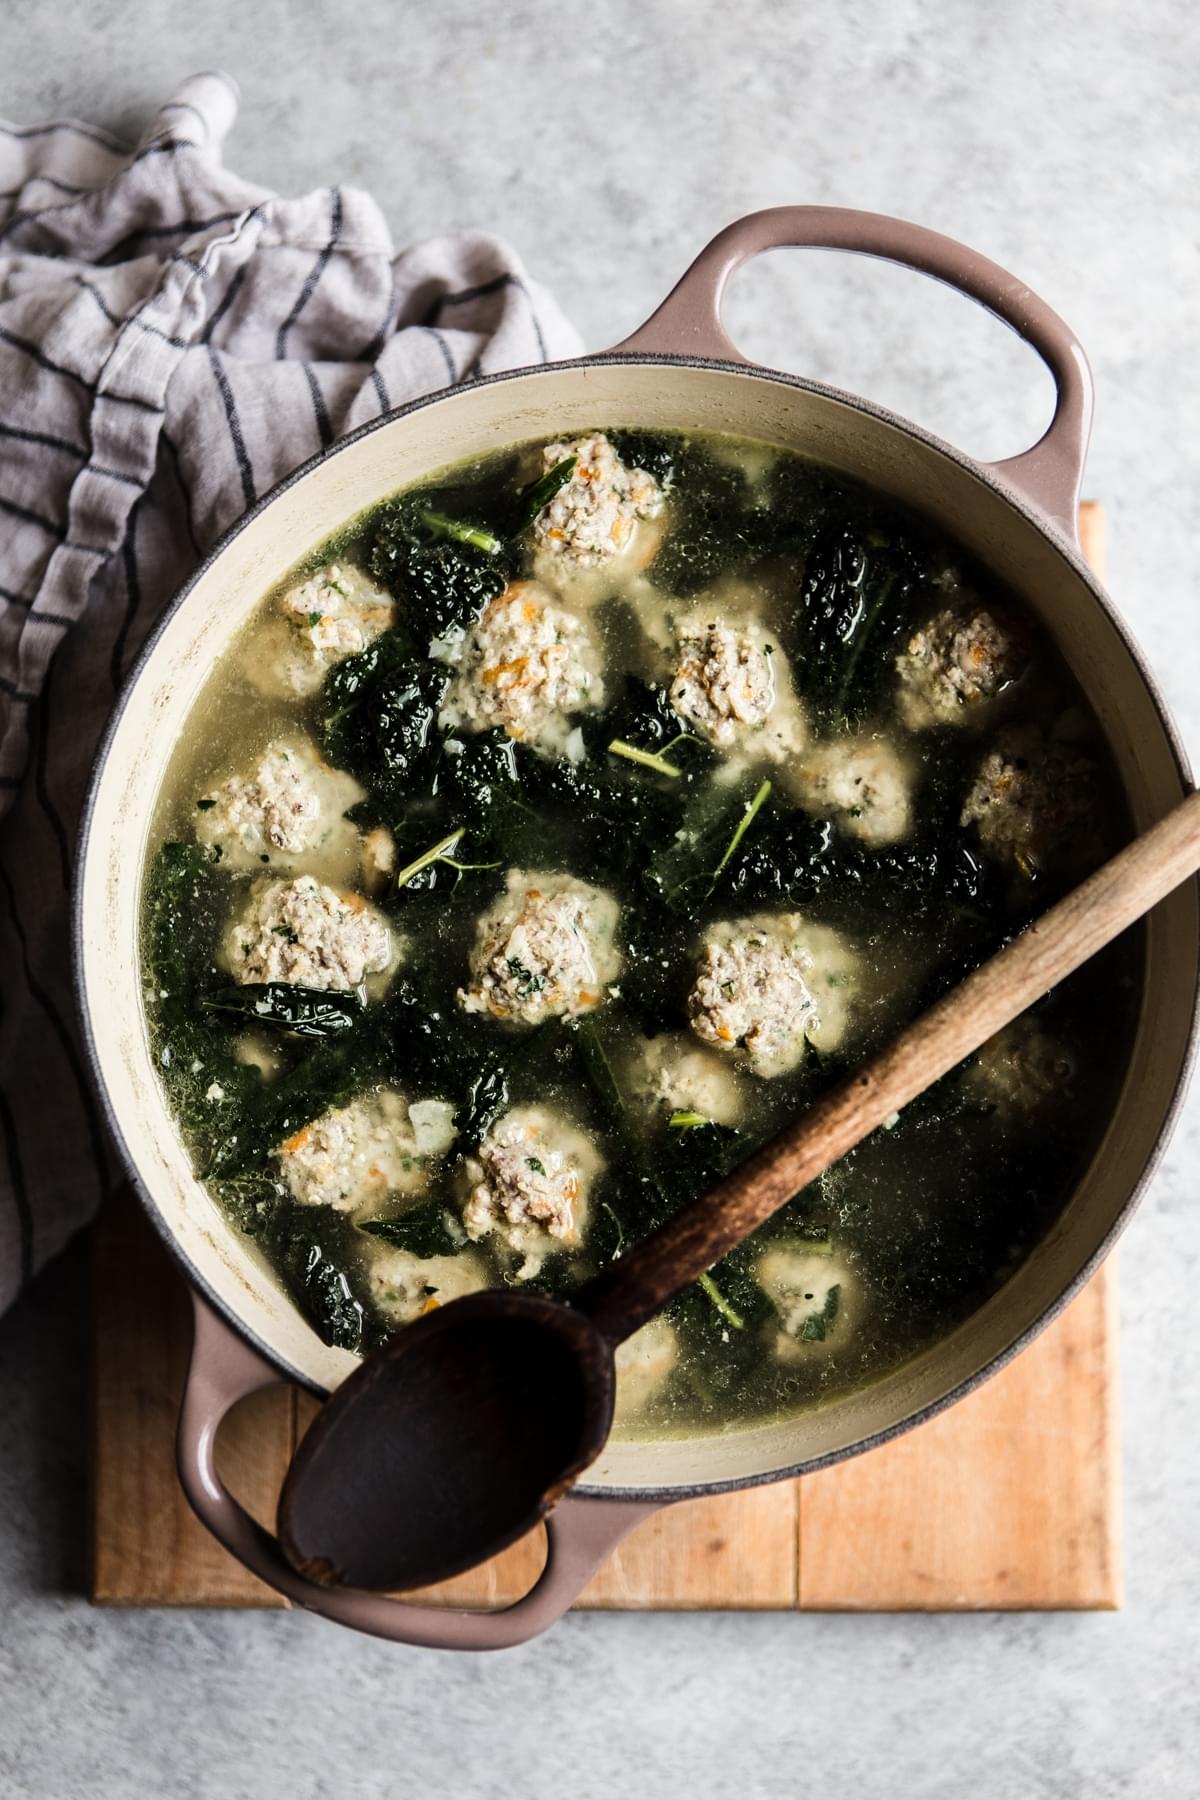 Whole 30 approved Italian Wedding Soup